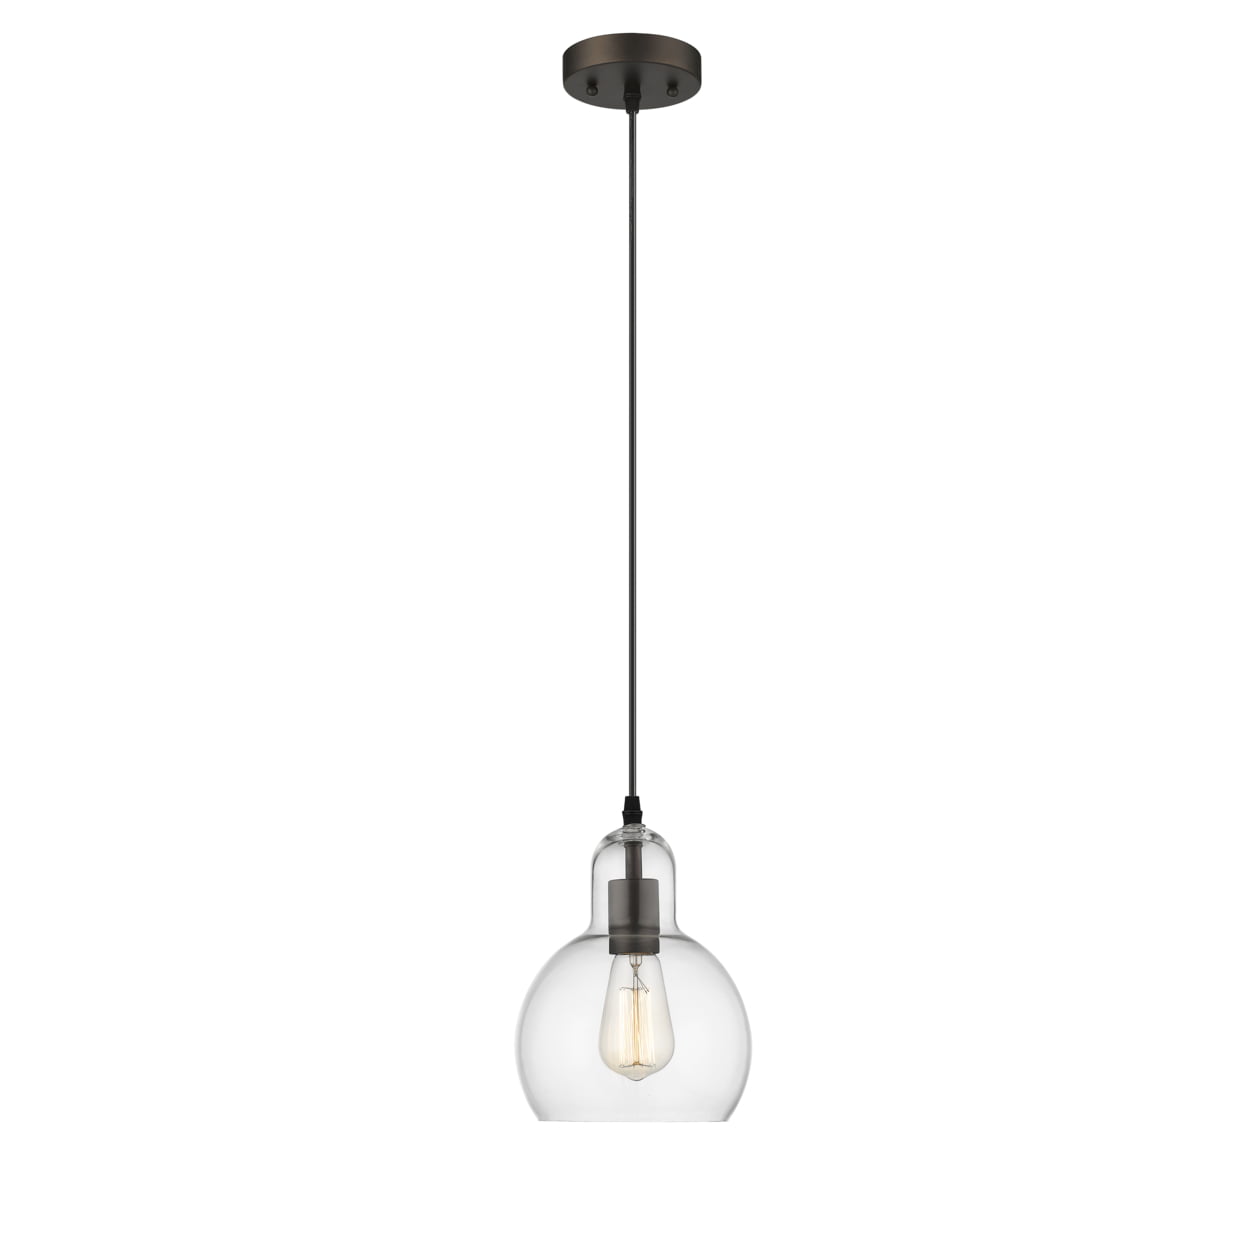 Picture of Chloe Lighting CH2S113RB08-DP1 Leilani Transitional 1 Light Rubbed Bronze Mini Ceiling Pendant - 7.5 in.